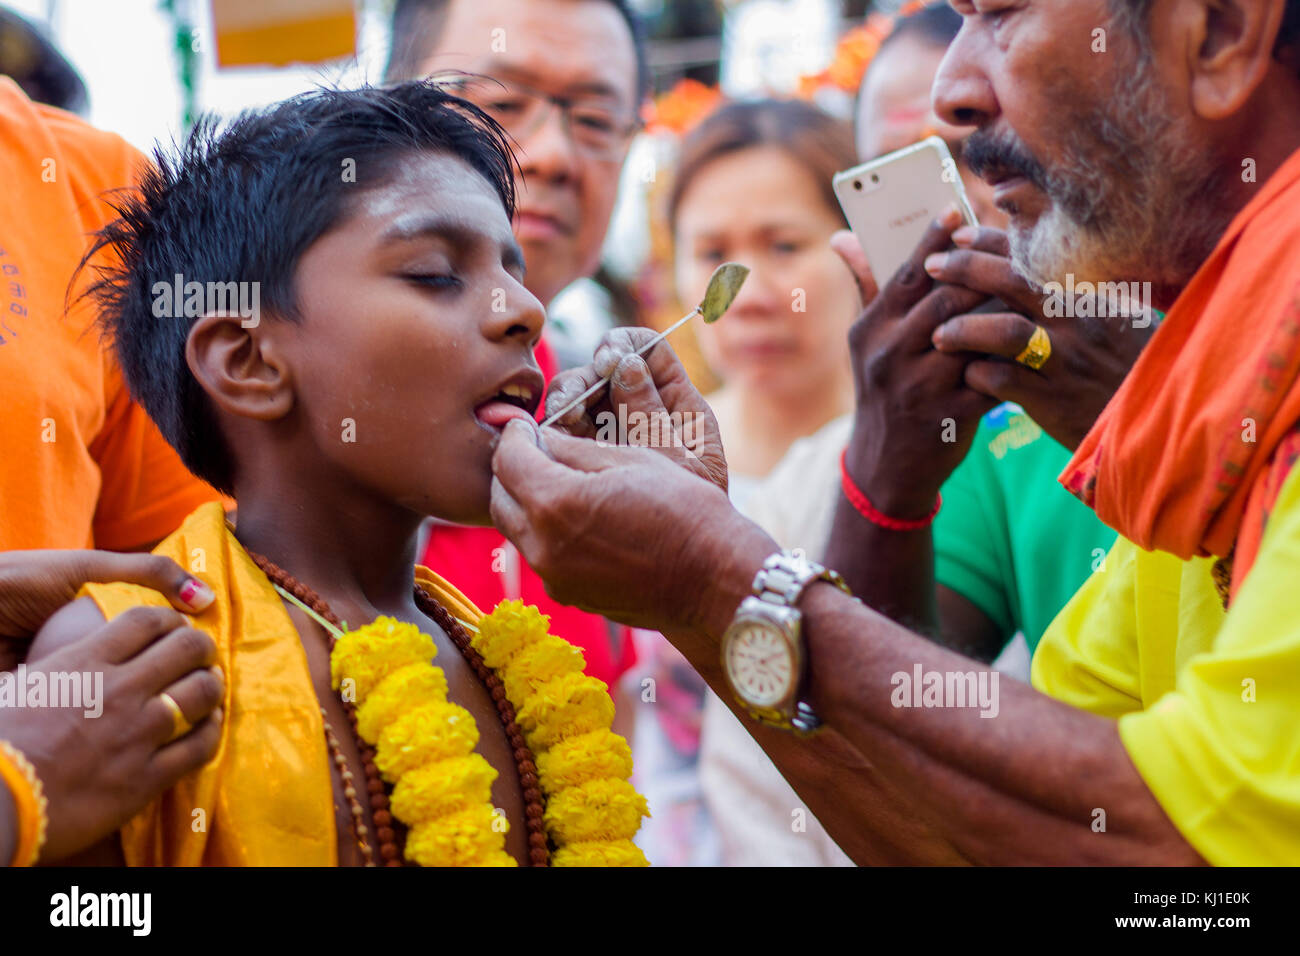 During Thaipusam festival in MAlaysia, Hindu Devotees preparing prayer blessing ceremony by piercing tounge to fulfill their vows and offer thanks to  Stock Photo